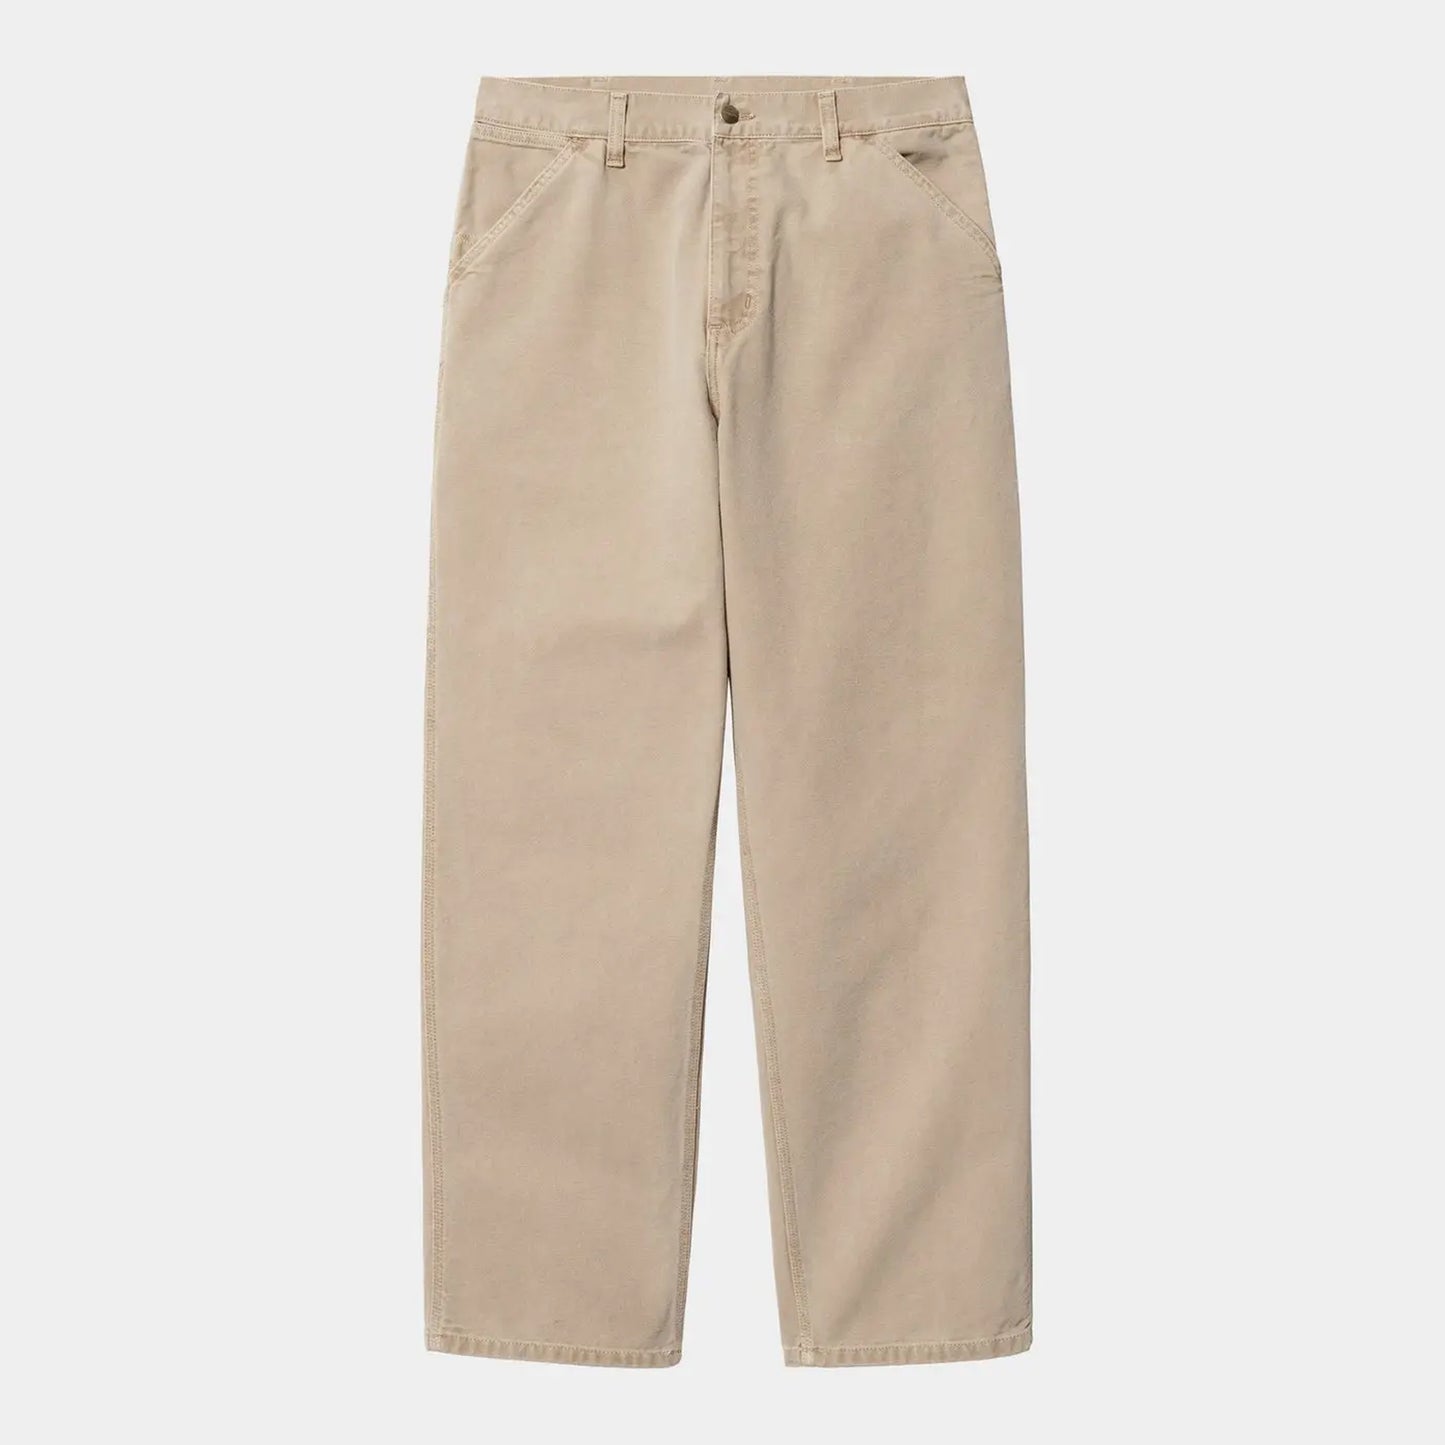 Single Knee Pant - Faded Dusty H Brown